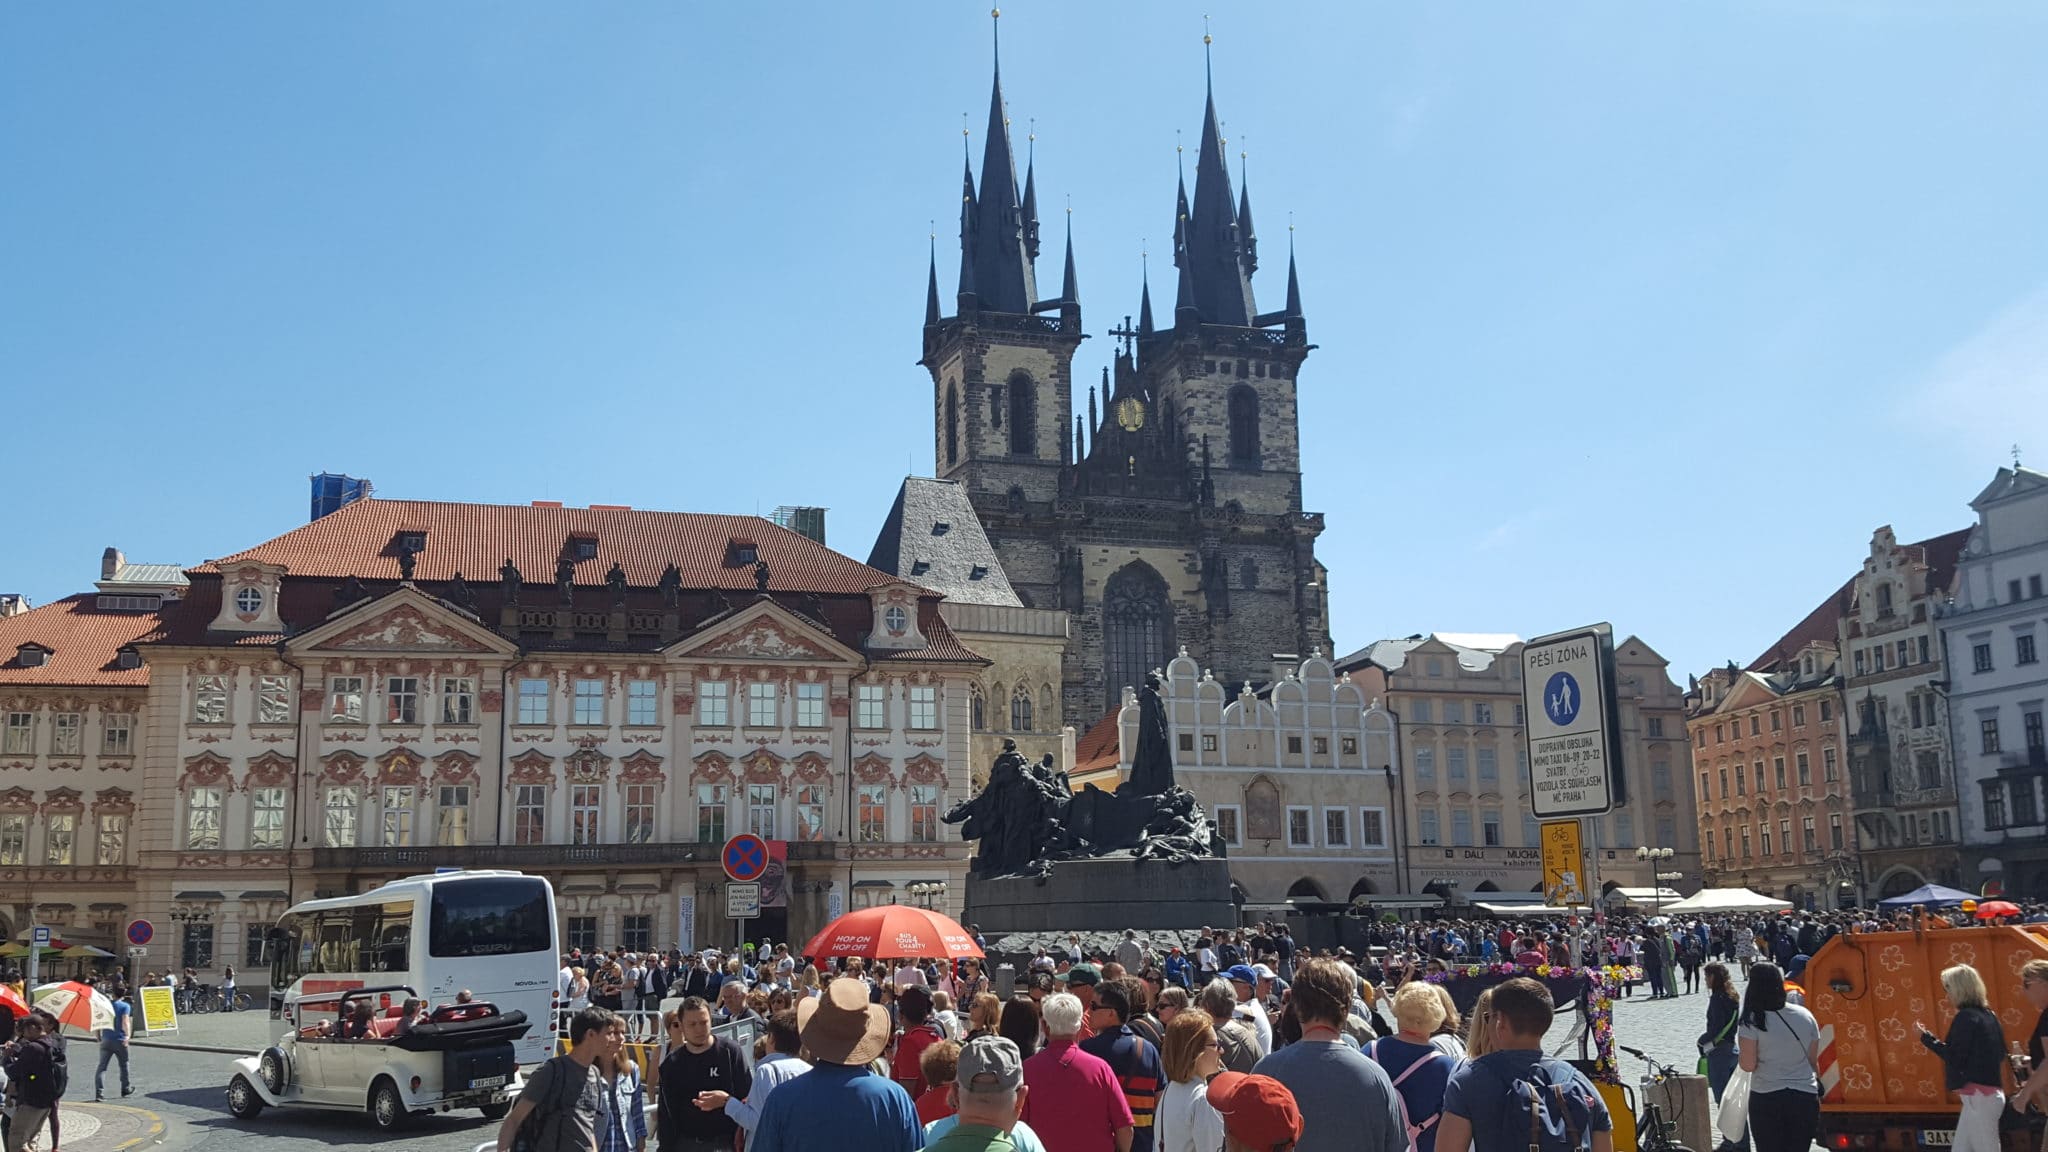 Old Town Square - Top 10 Things to See and Do in Prague